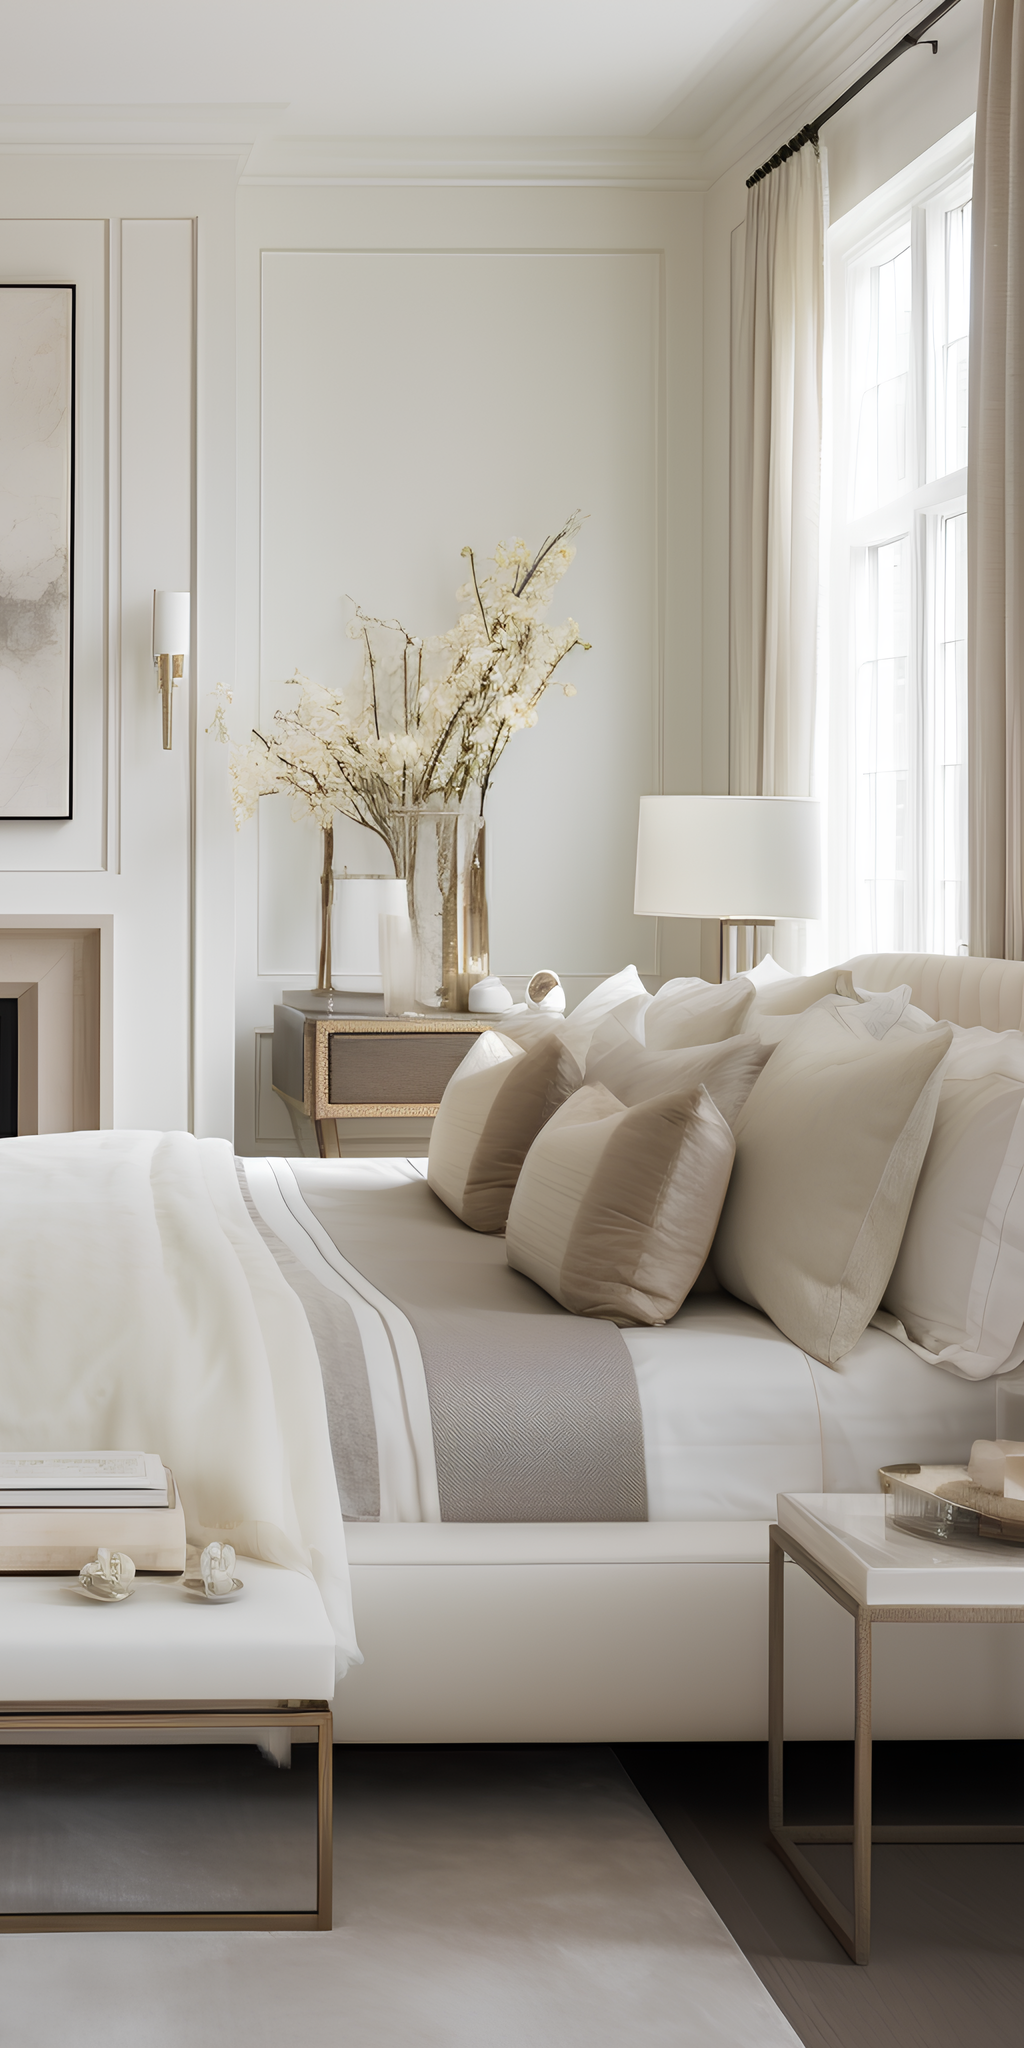 Stunning White Bedroom Furniture Ideas for a Fresh and Bright Look